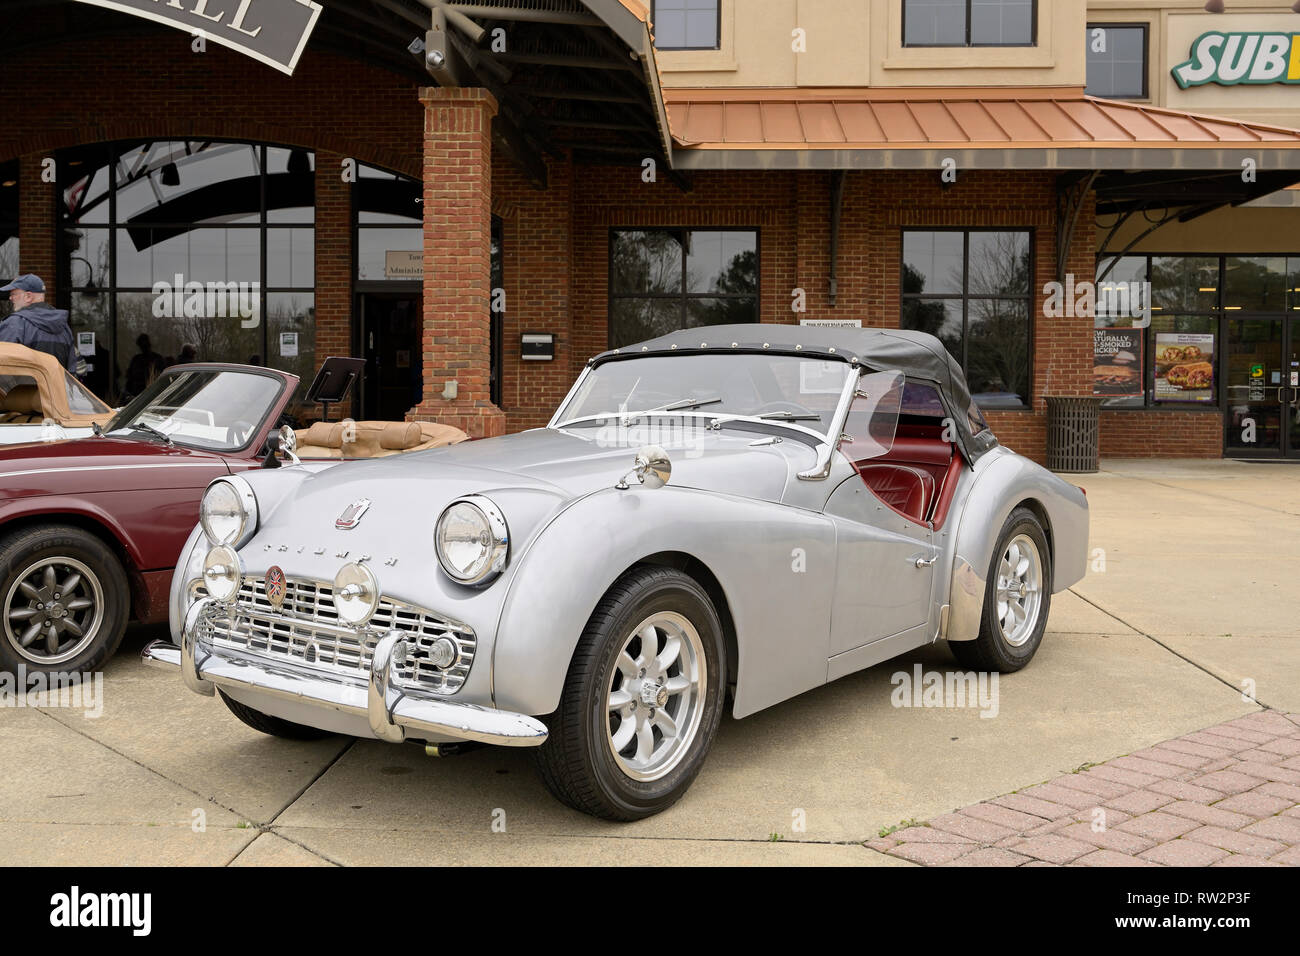 Vintage, classic or antique British sports car, Triumph TR3 soft top roadster on display at a classic car show in Pike Road Alabama, USA. Stock Photo